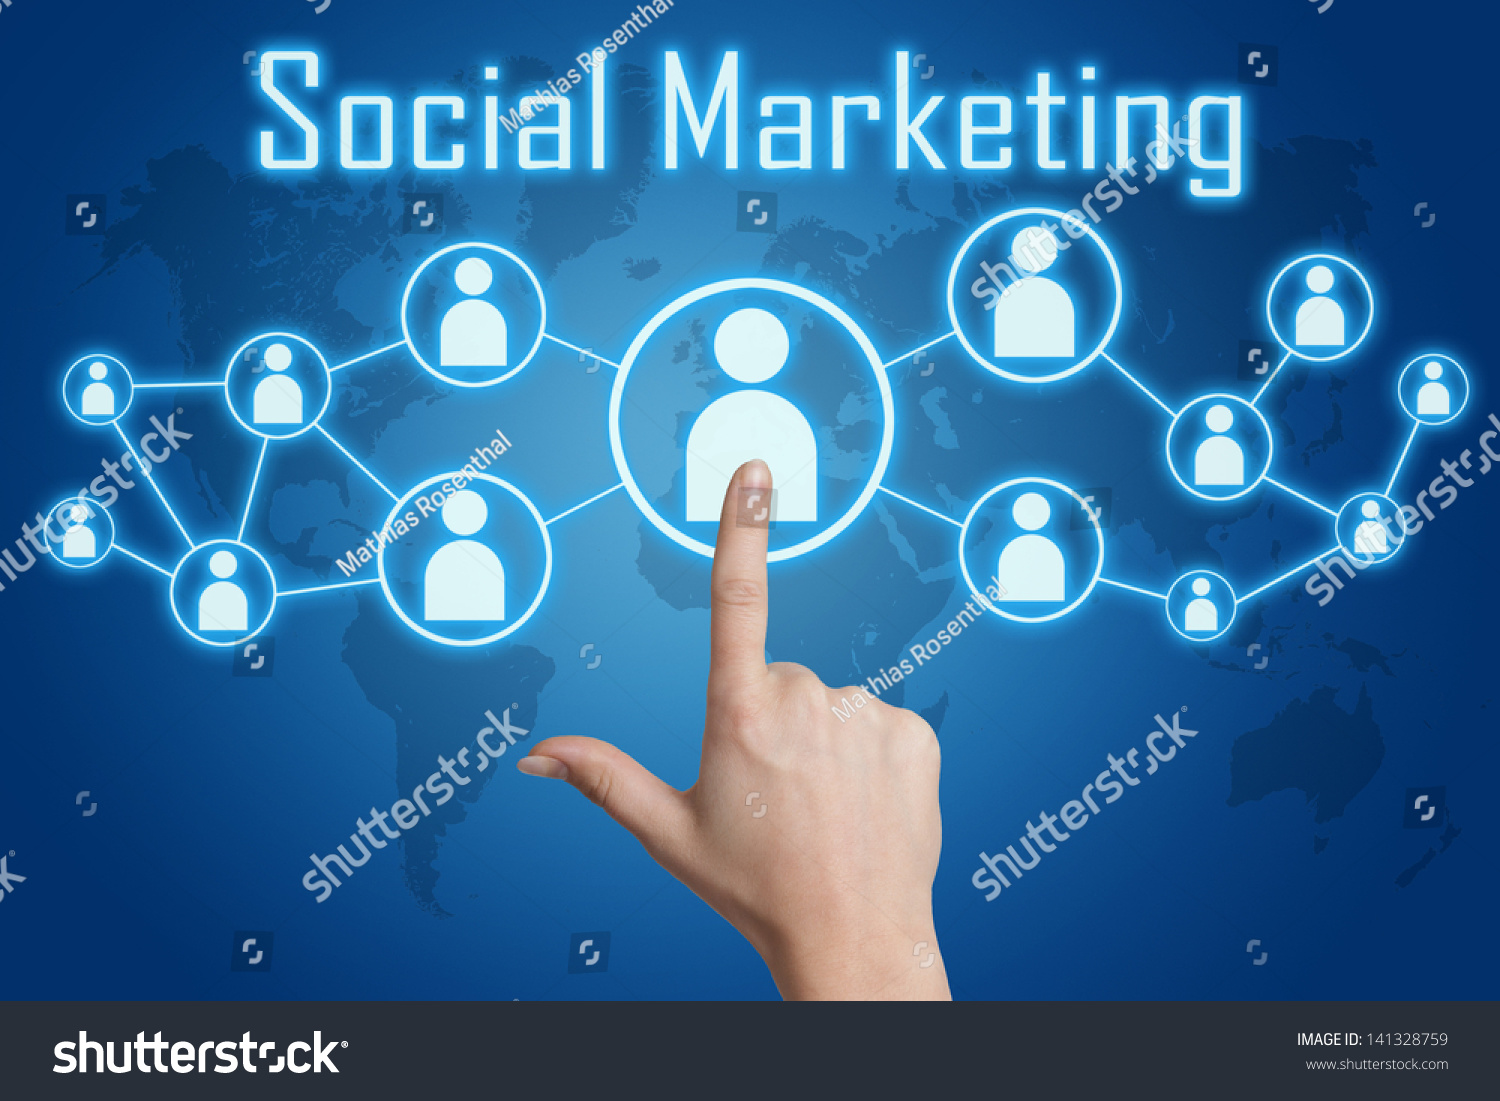 stock-photo-woman-hand-pressing-social-marketing-icon-on-blue-background-with-world-map-141328759.jpg